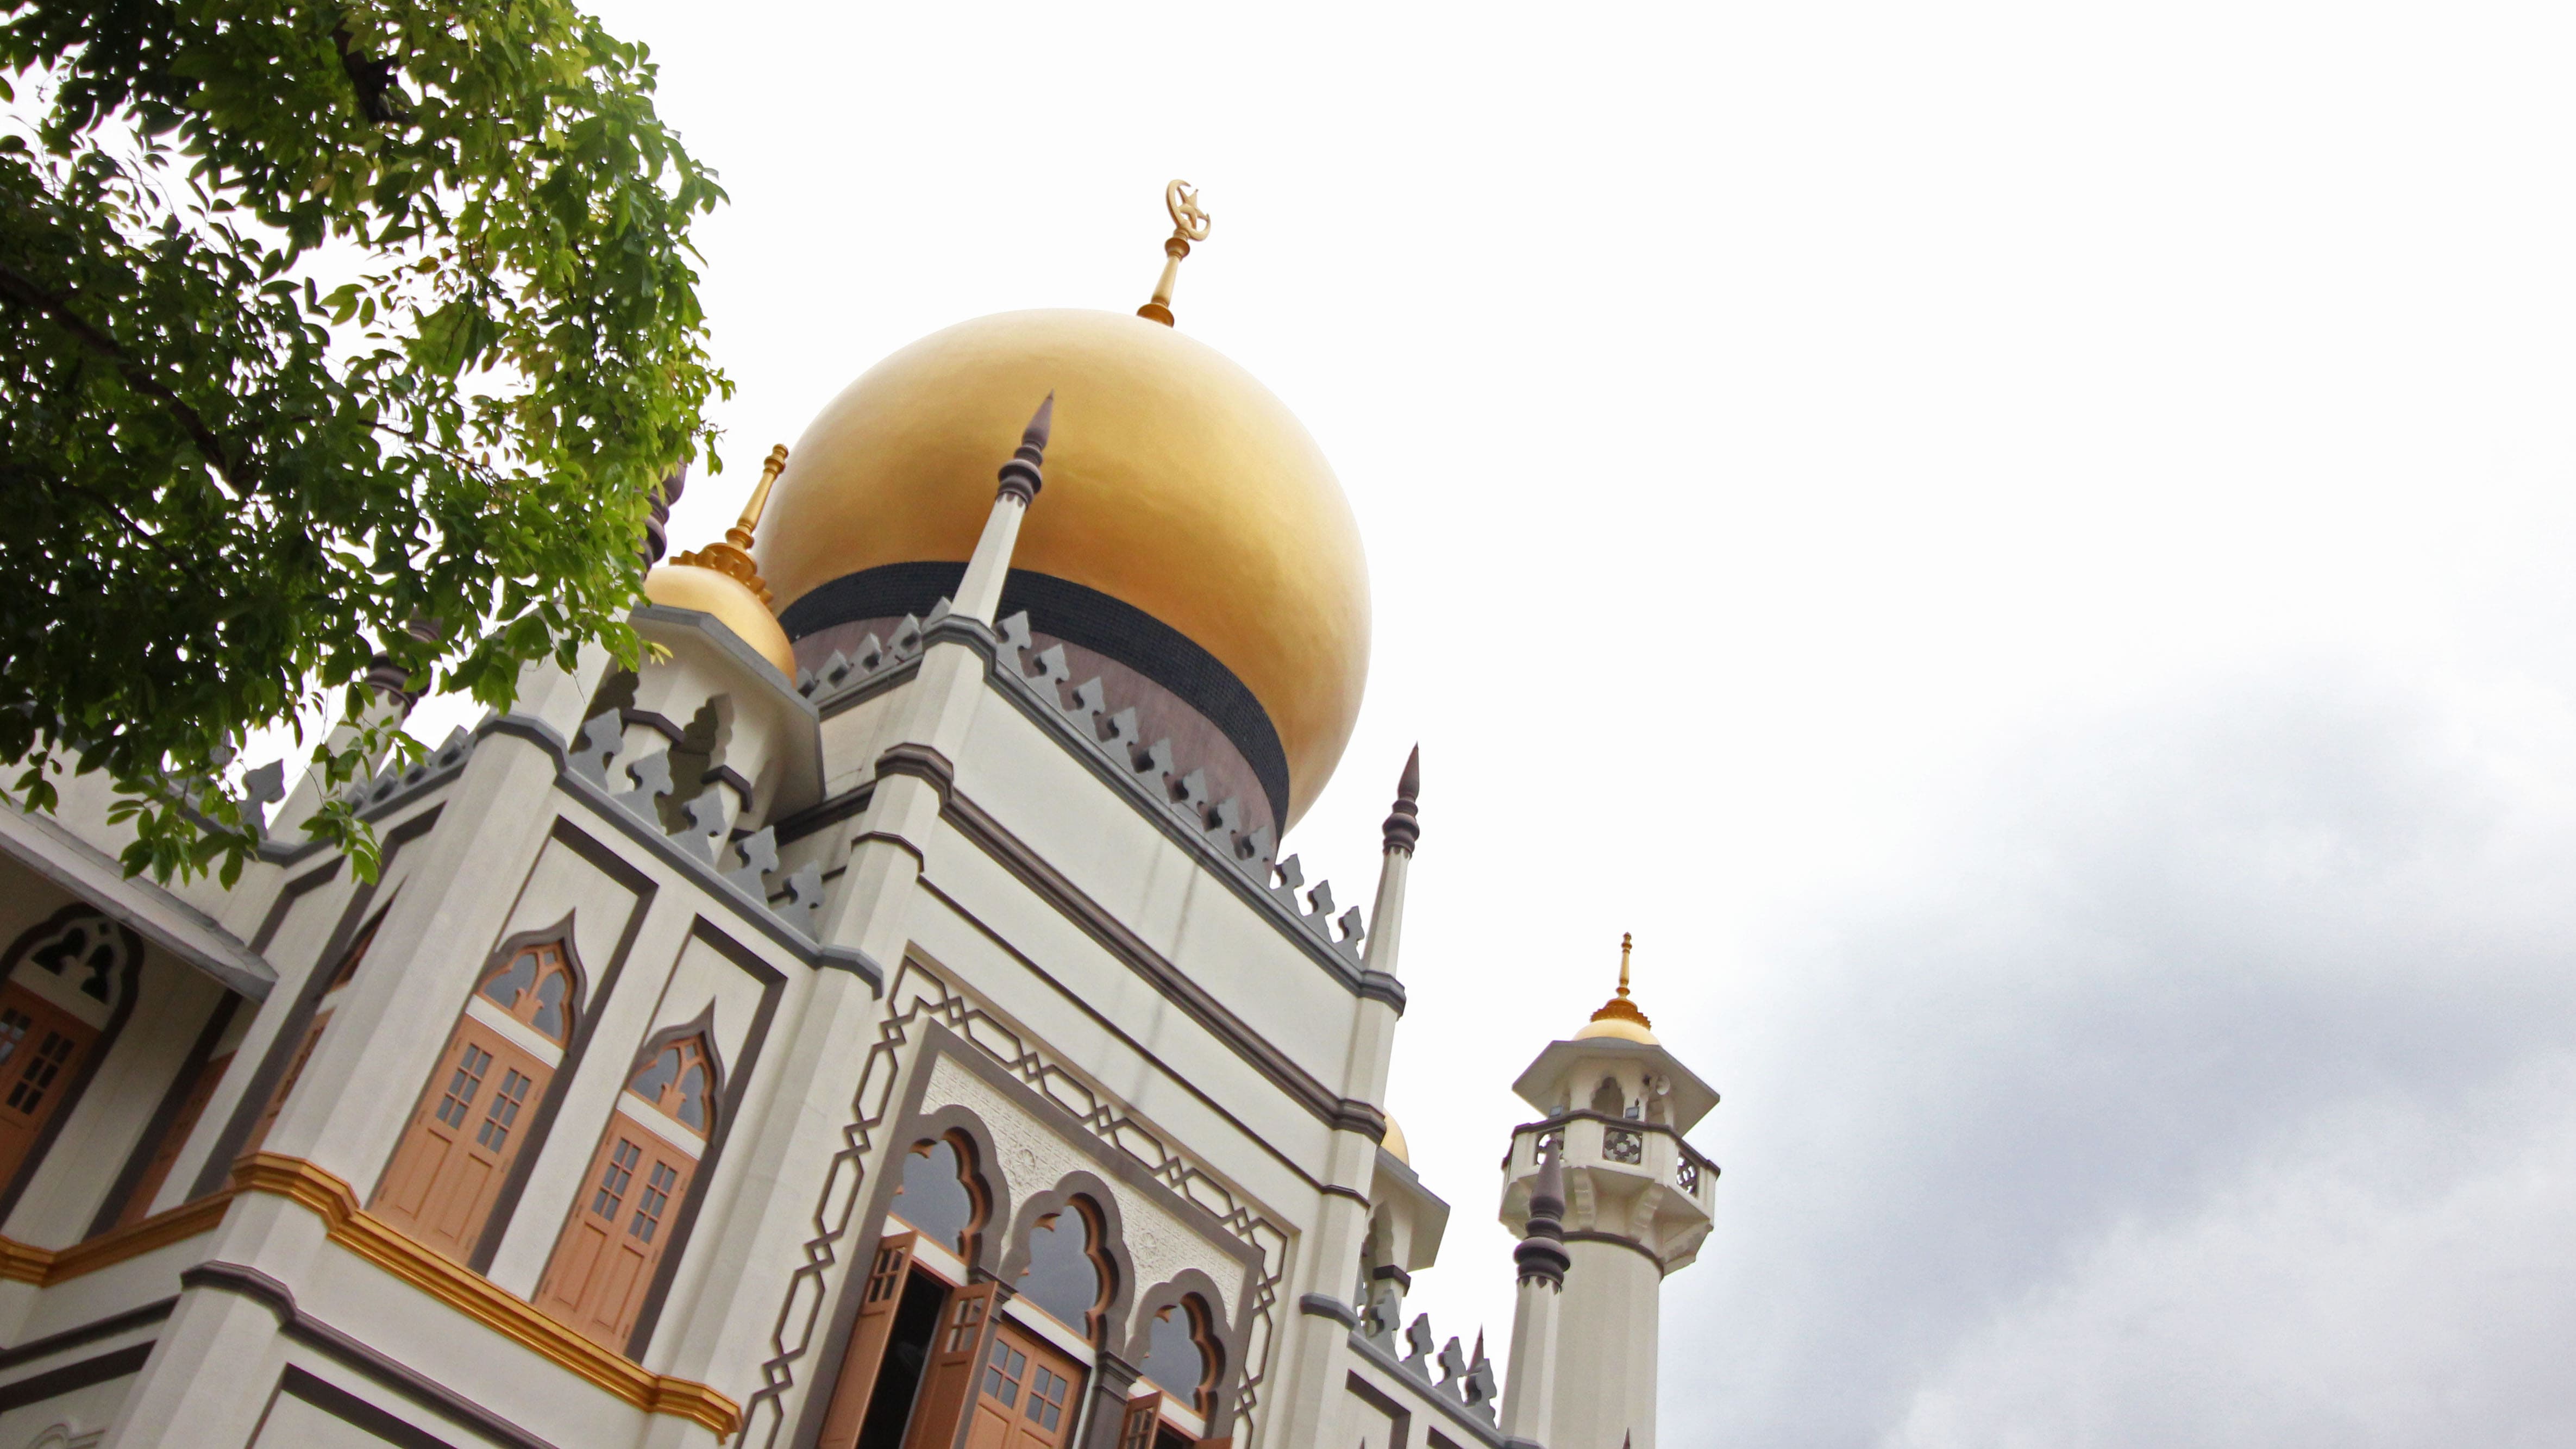 The Masjid Sultan is one of the many pit stops you will make on the Historical Singapore Bike Tour. Immerse yourself in stories of Singapore’s early development as you retrace the steps of migrant communities in search of a better life. Photo by Lin Yanqin